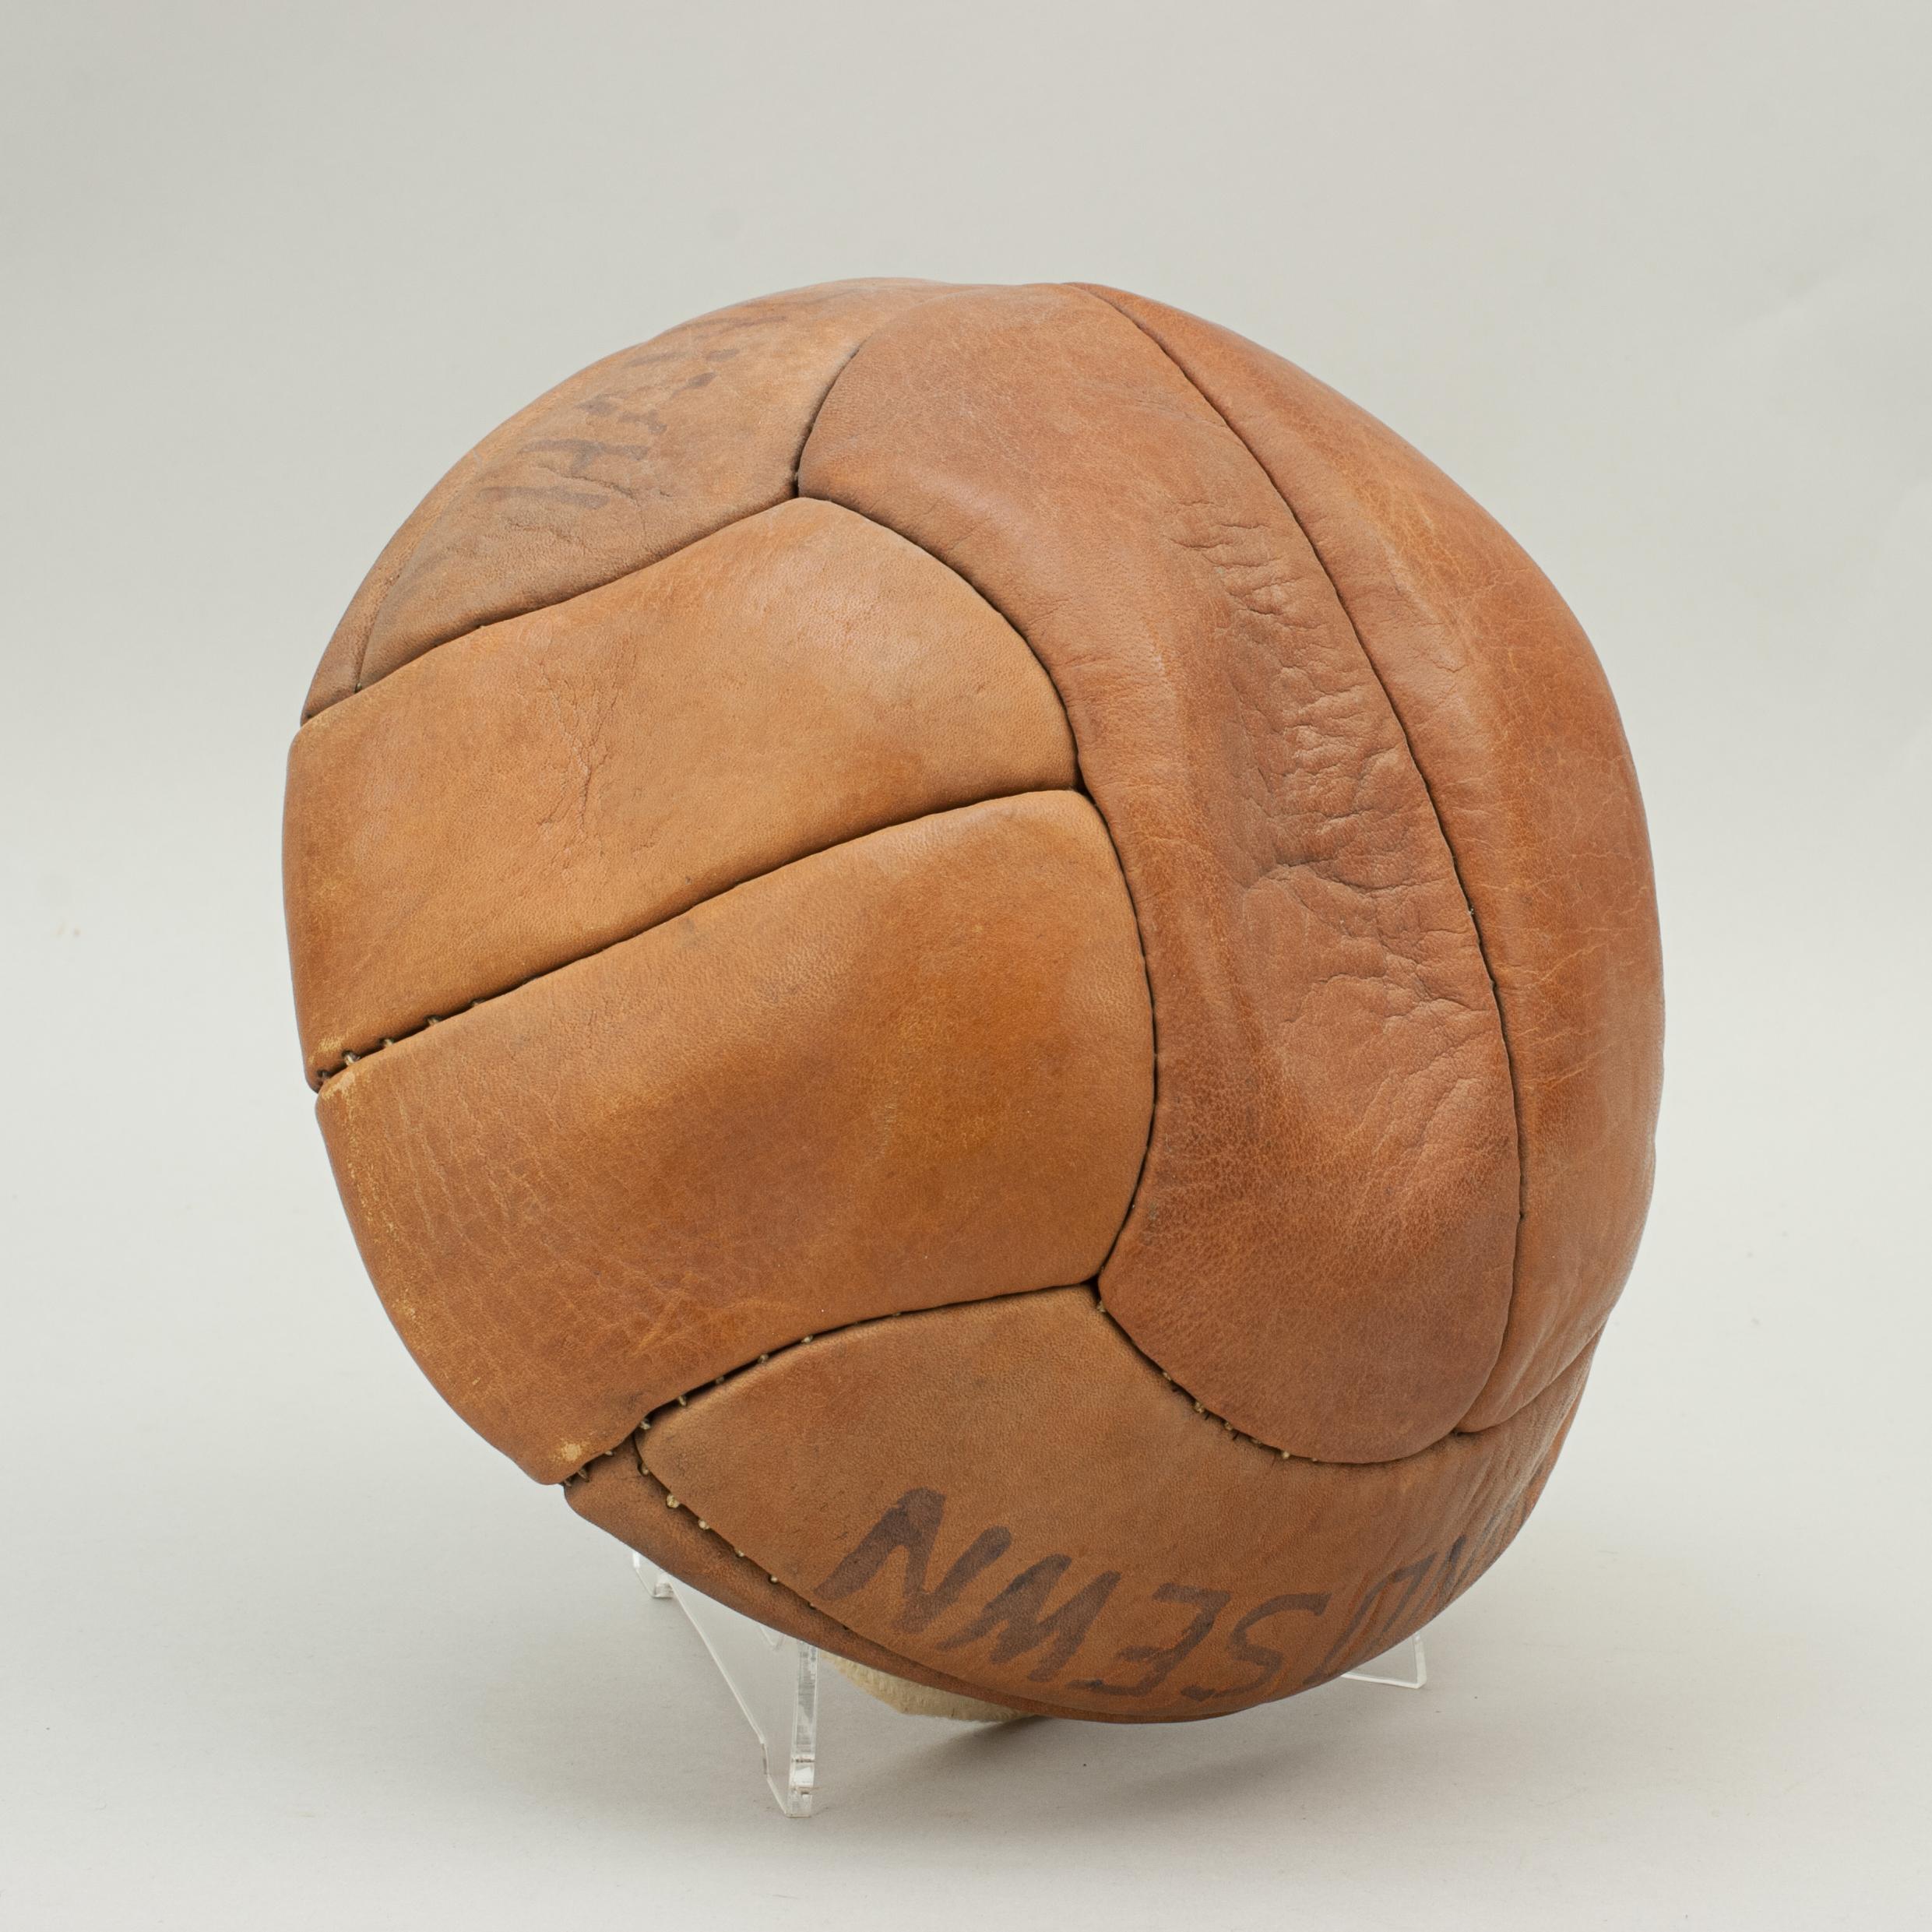 Vintage unused leather football.
A traditional hand sewn 12-panel tan leather football in original condition. The unused ball has a lace-up slit to the top to enable bladder inflation and is called 'SERVICE'. It is a No. 4 ball made of genuine